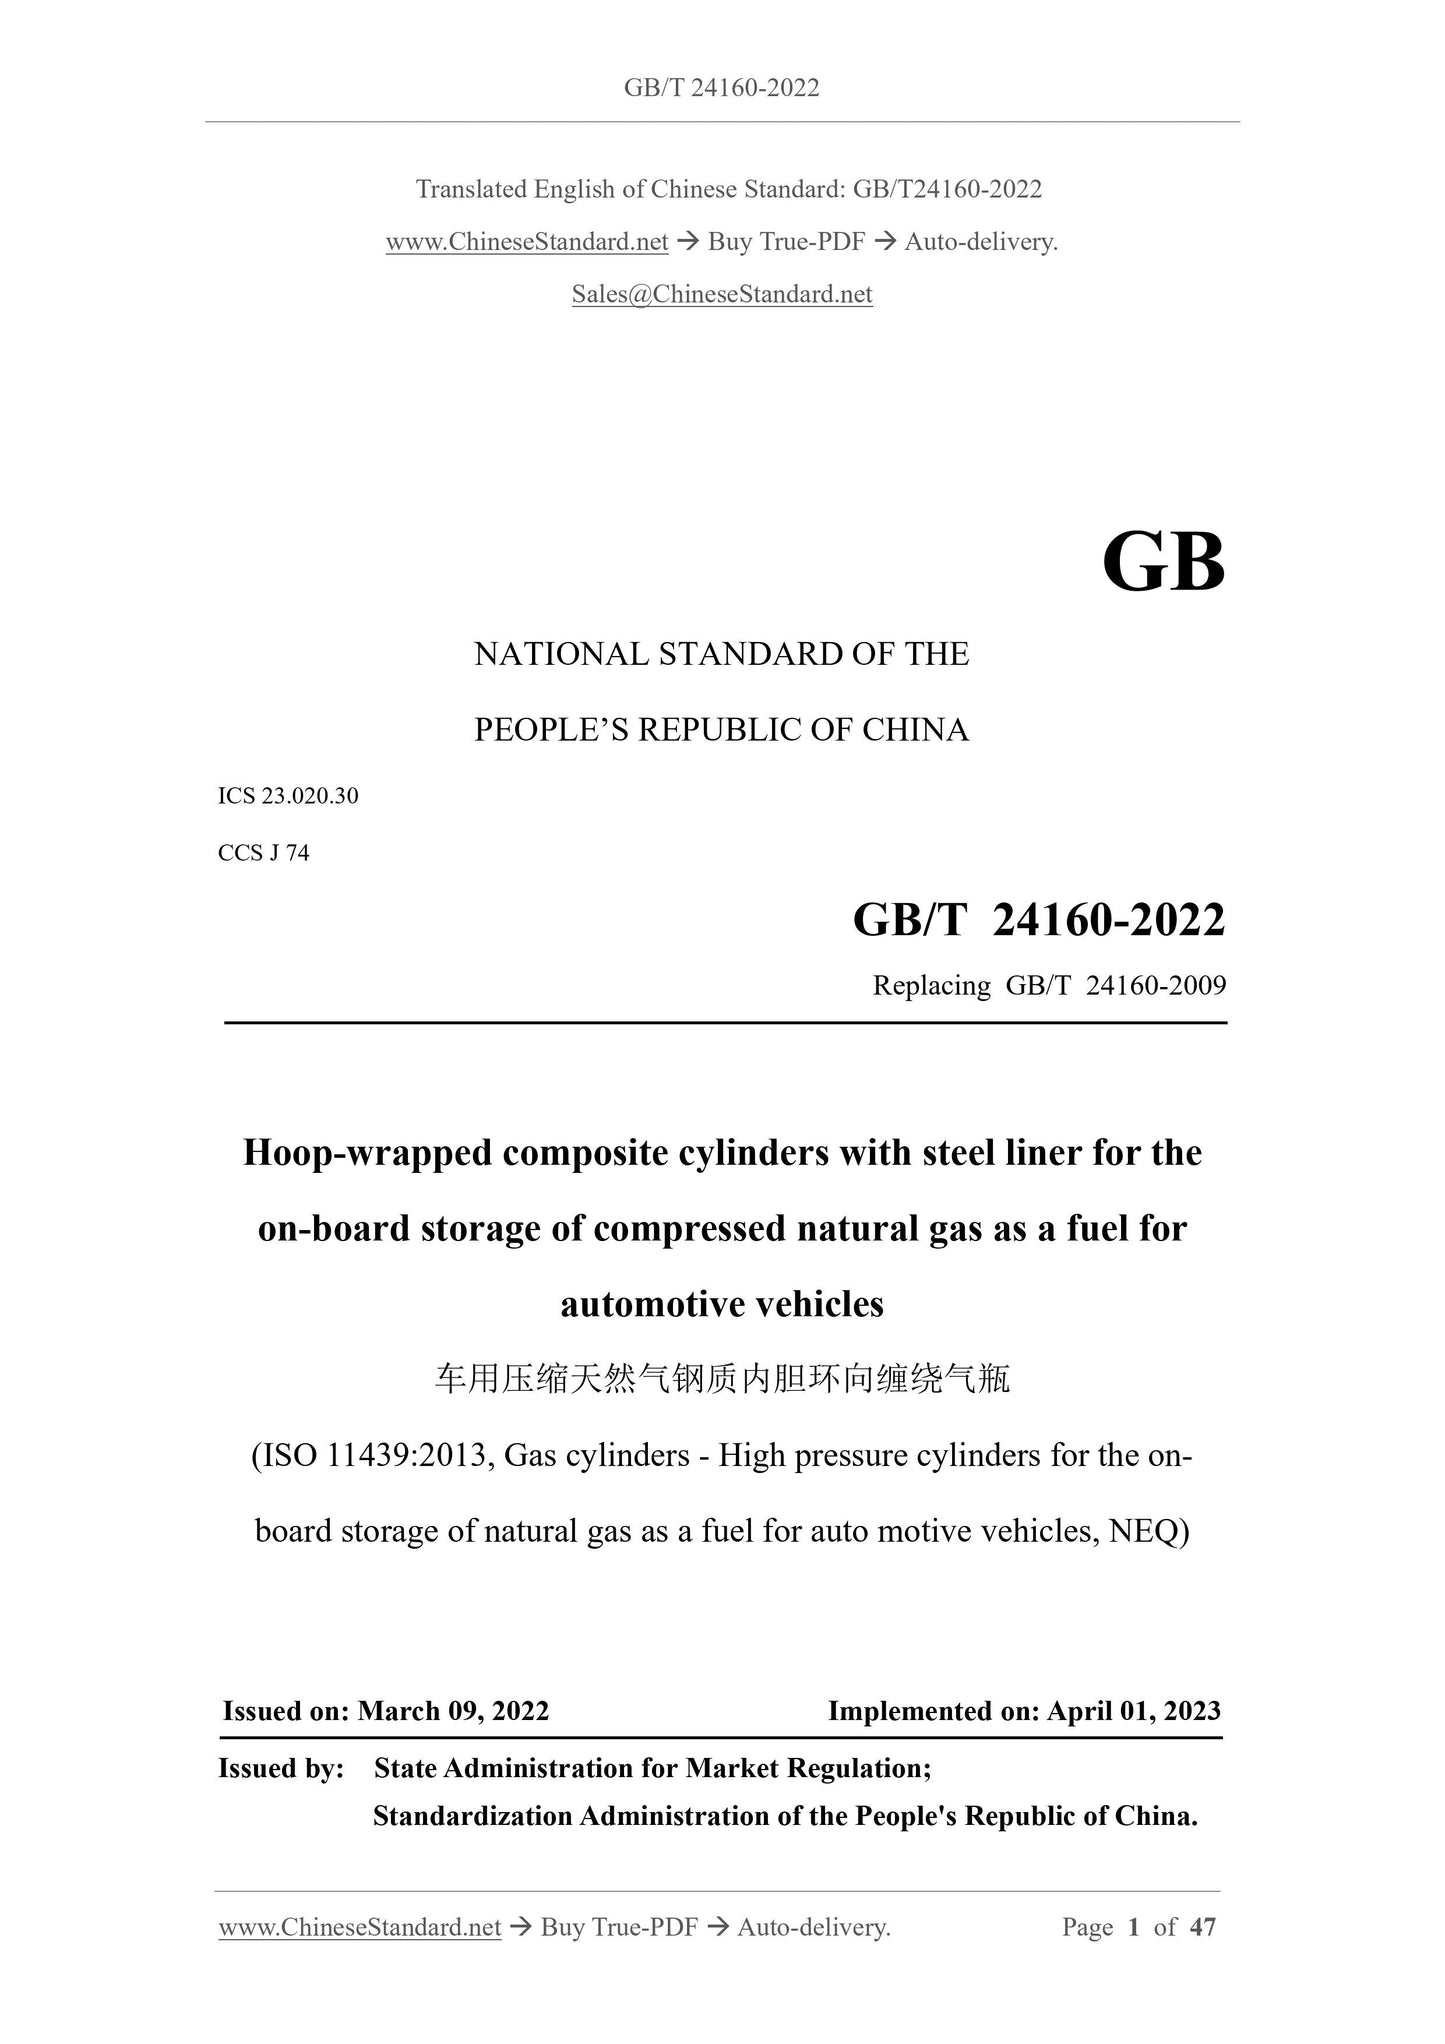 GB/T 24160-2022 Page 1